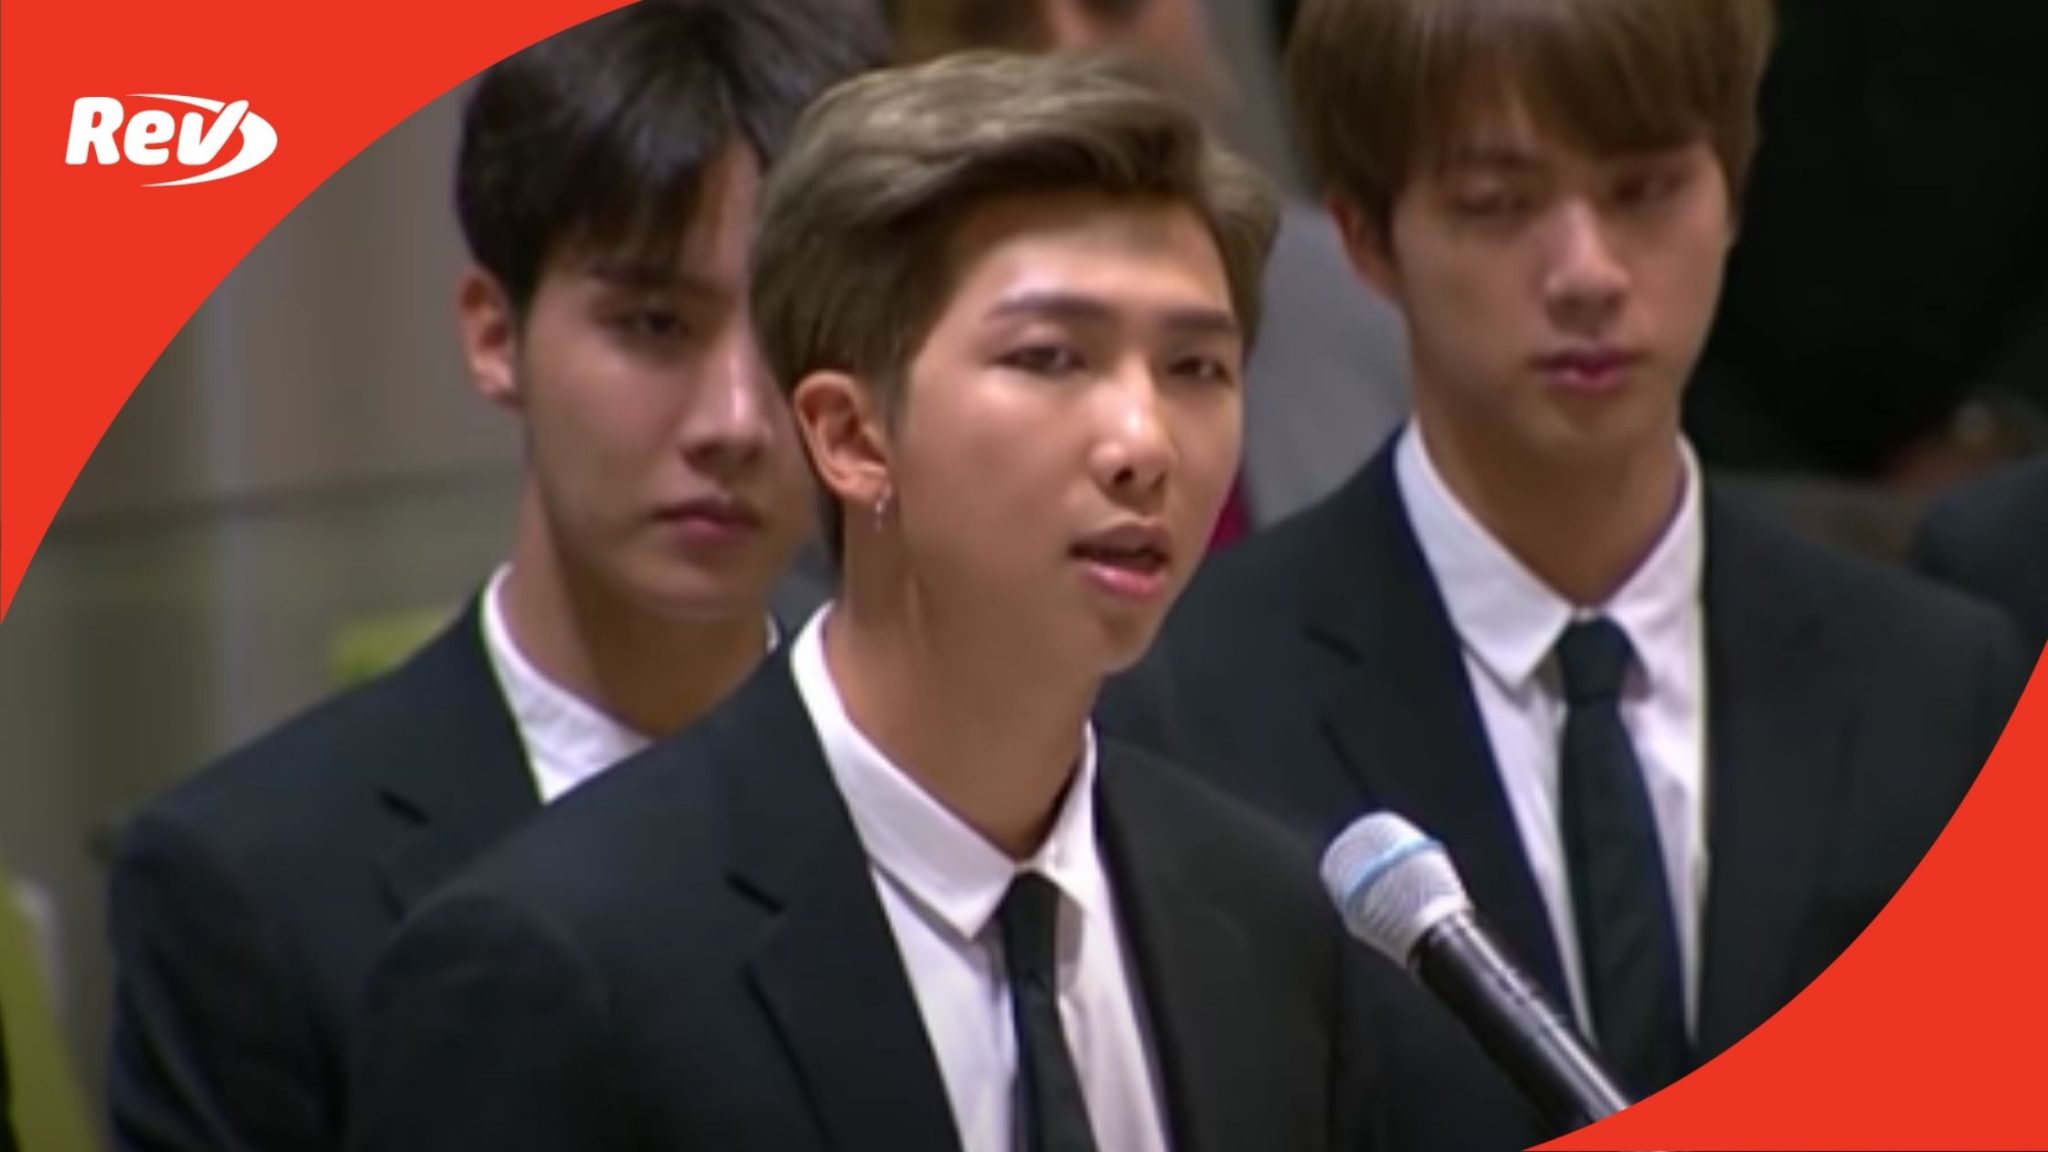 BTS heartfelt message to young people at UNGA